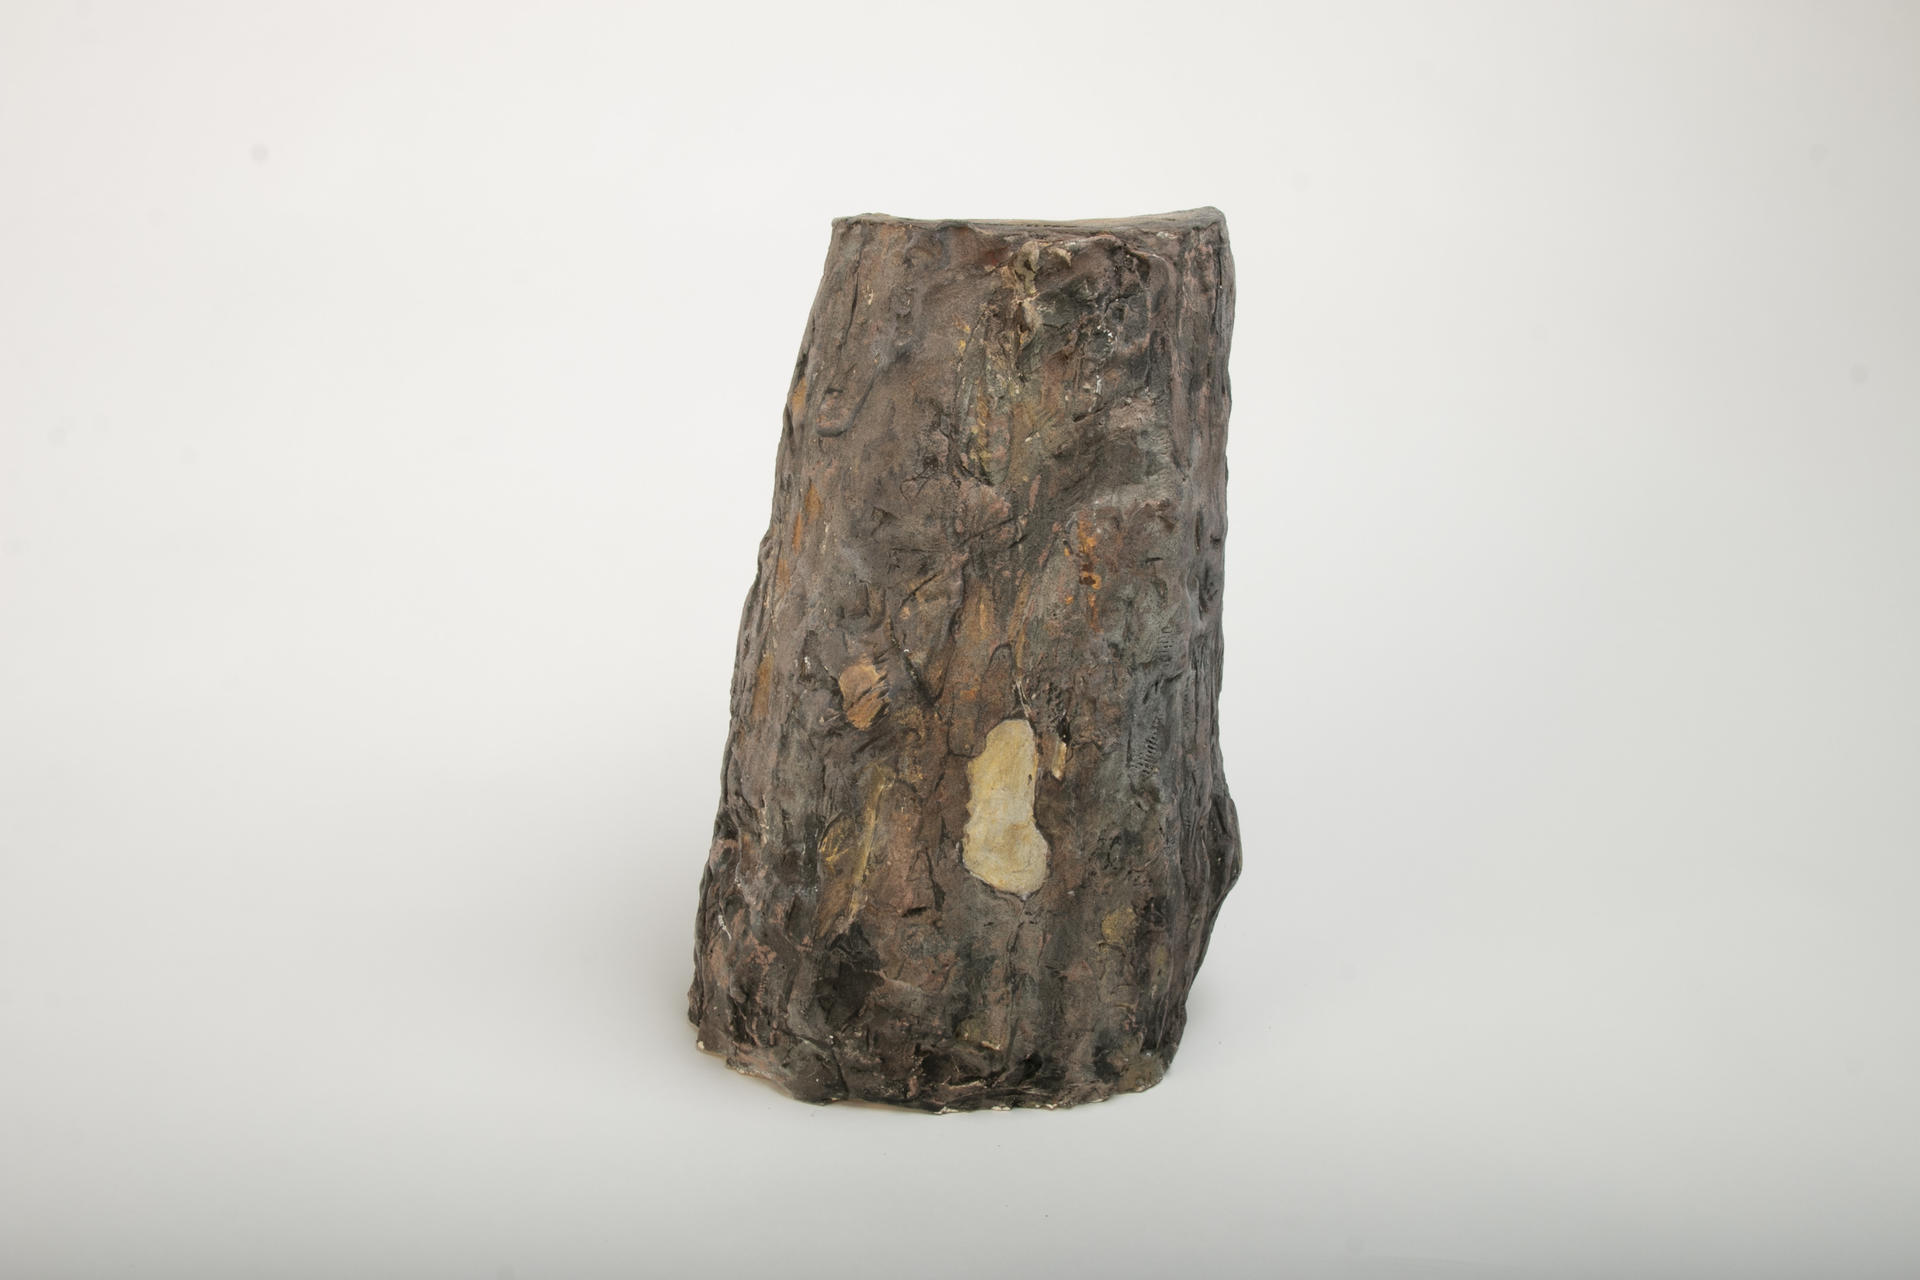 image of ceramic piece resembling a tree trunk